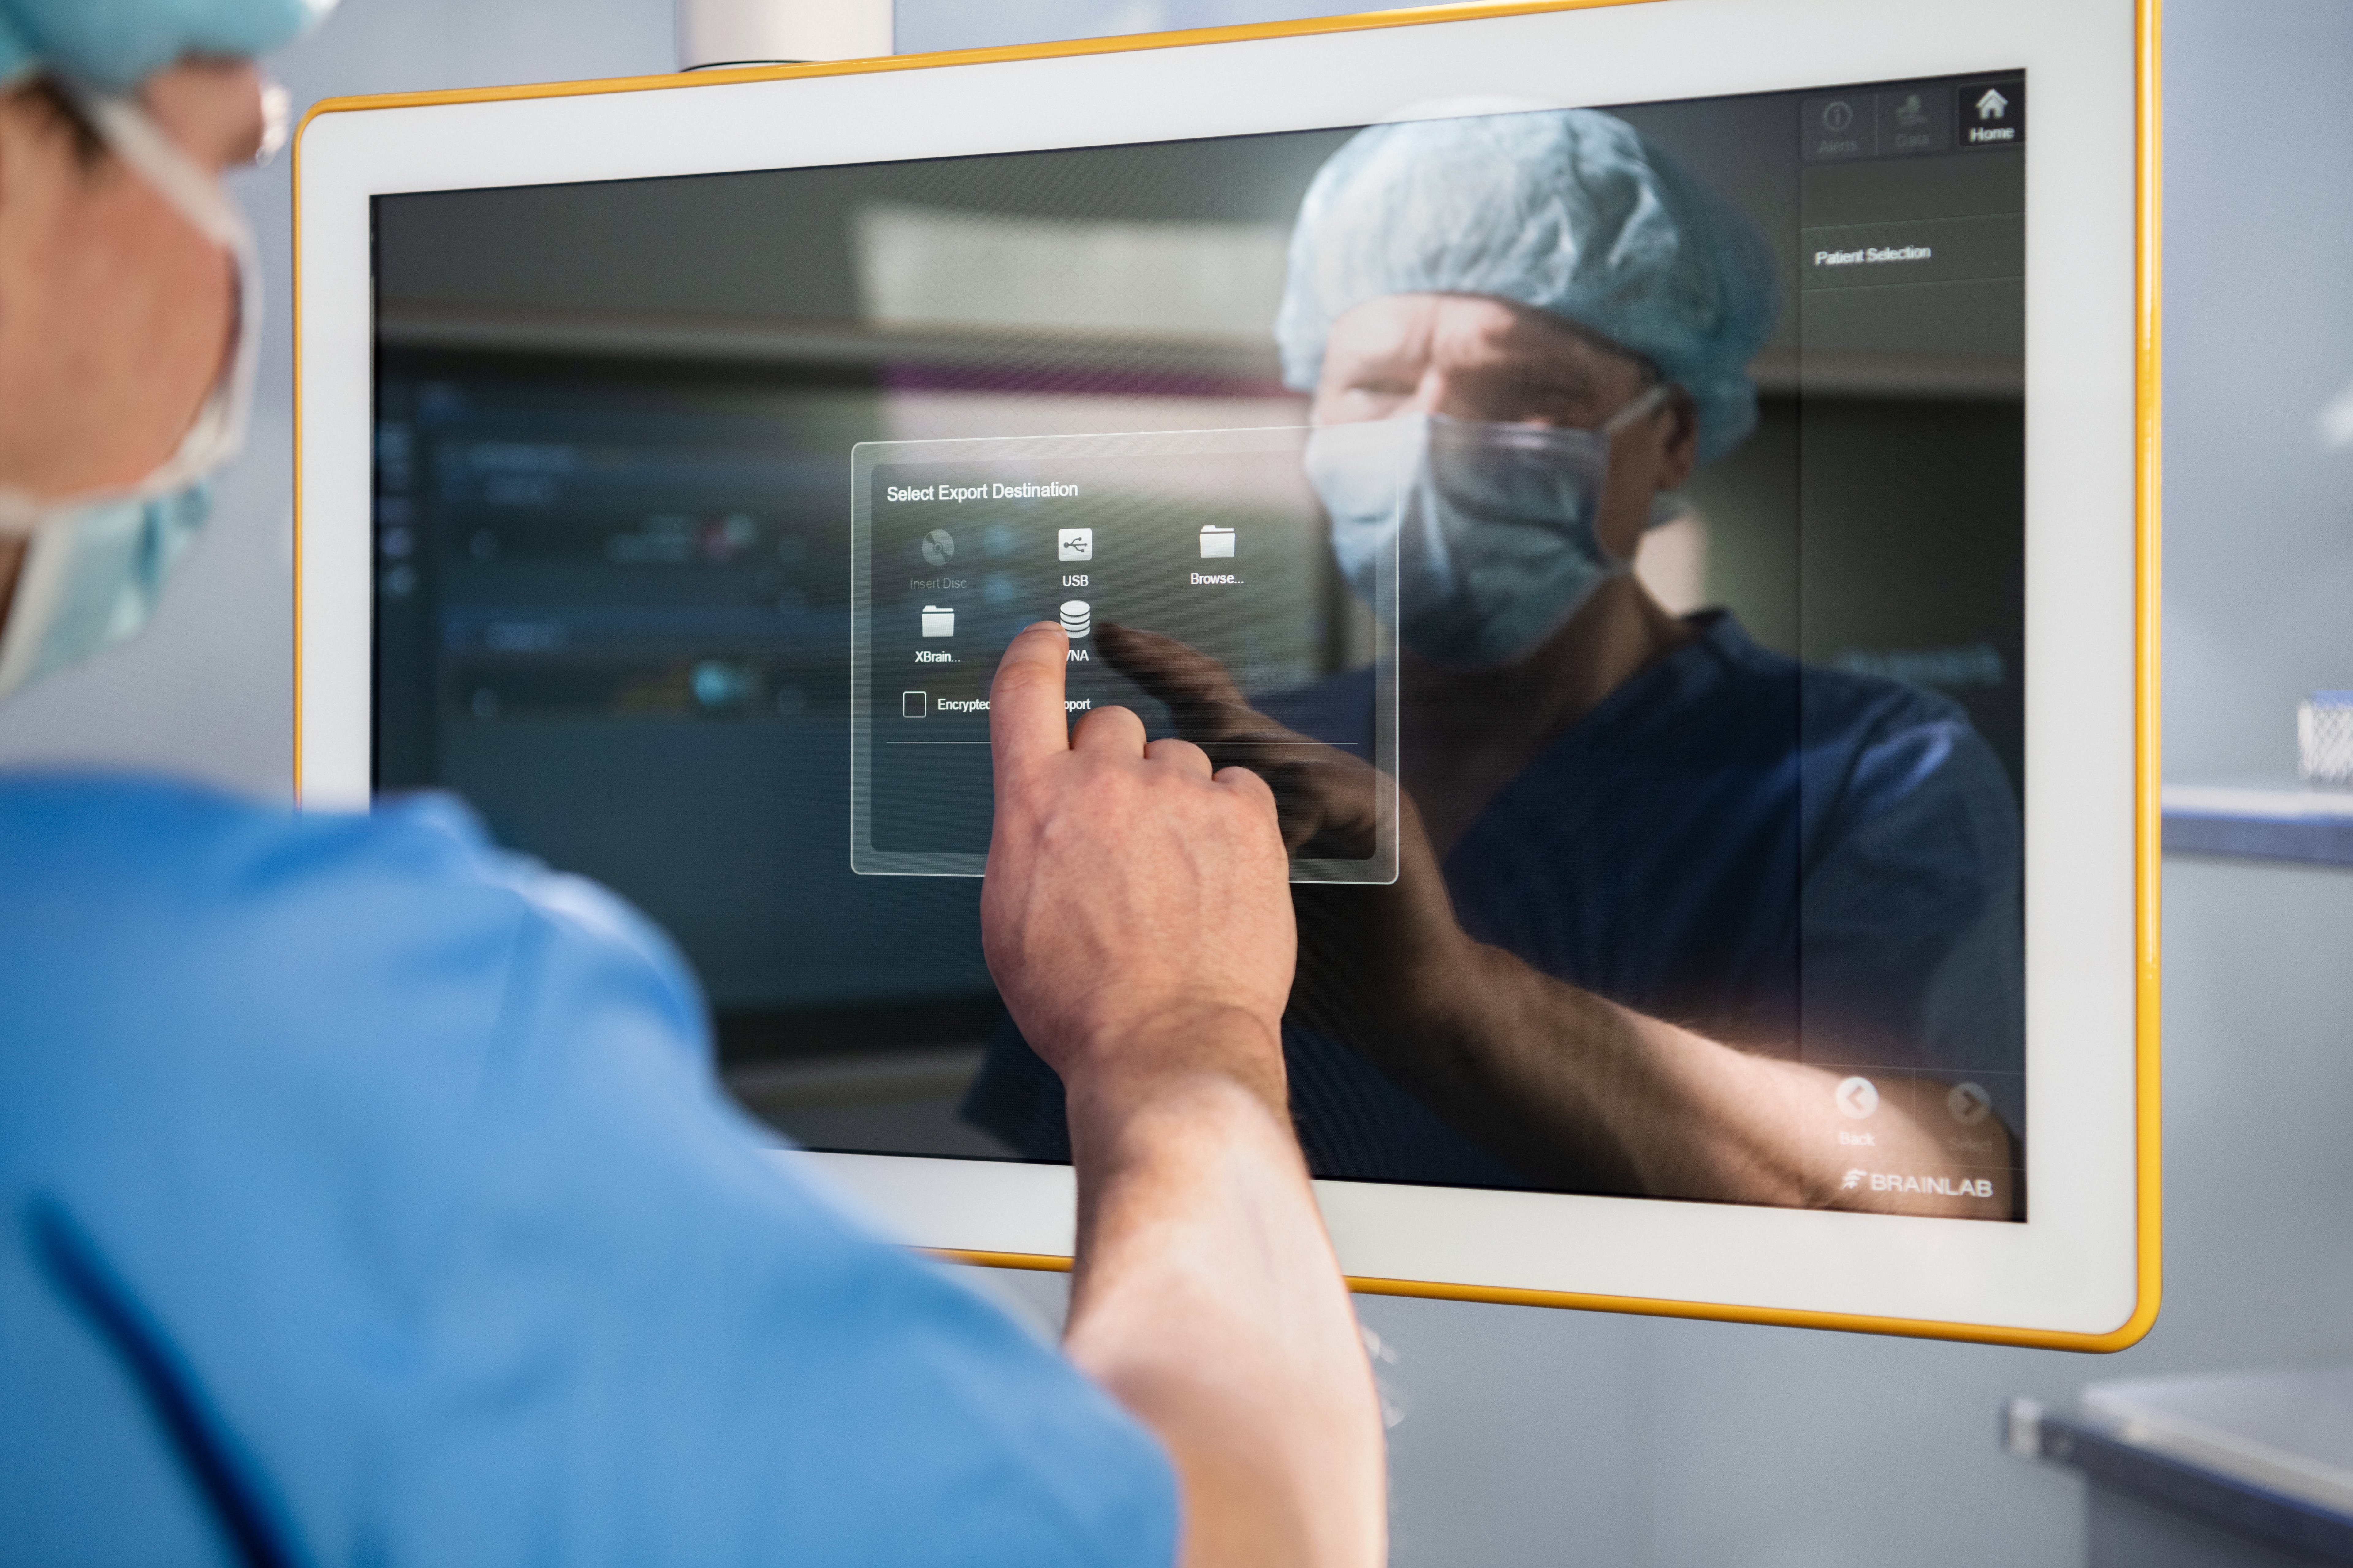 A surgeon archiving data using Brainlab technology in the OR - illustrating the service and support of Brainlab for healthcare IT